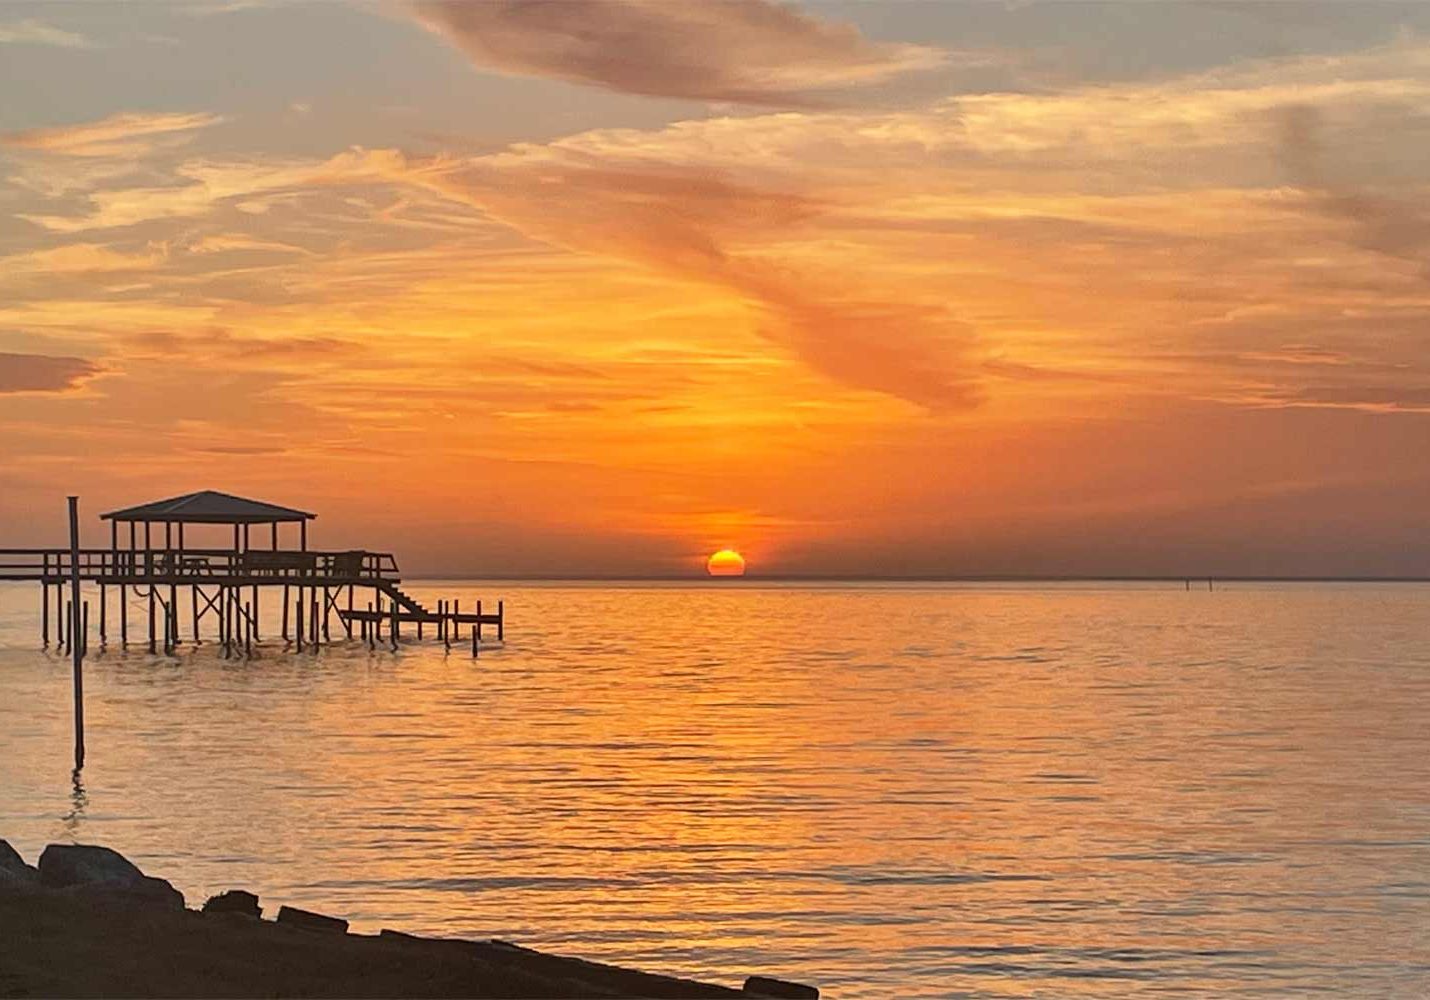 Fairhope Named &ldquo;Most Hippie Town&rdquo; By Online Media Site